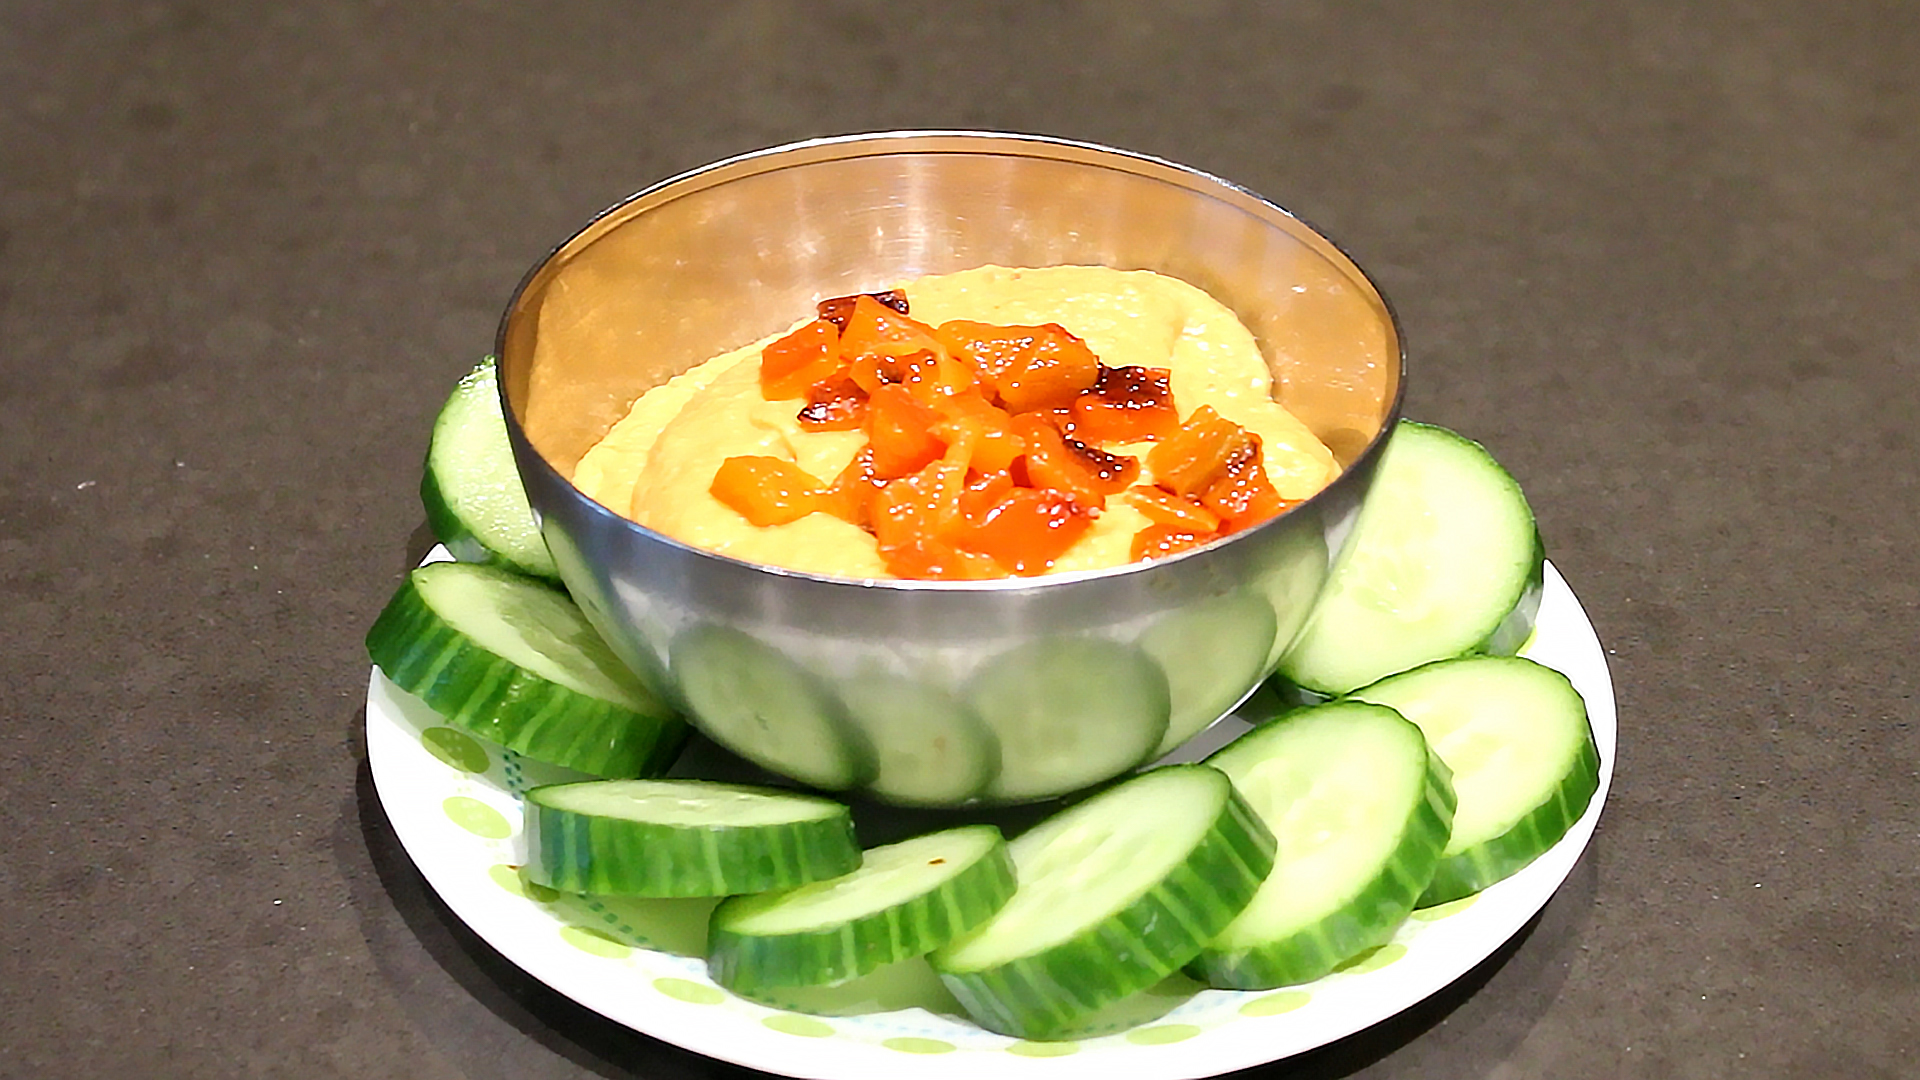 roasted red pepper hummus served with cucumber slices